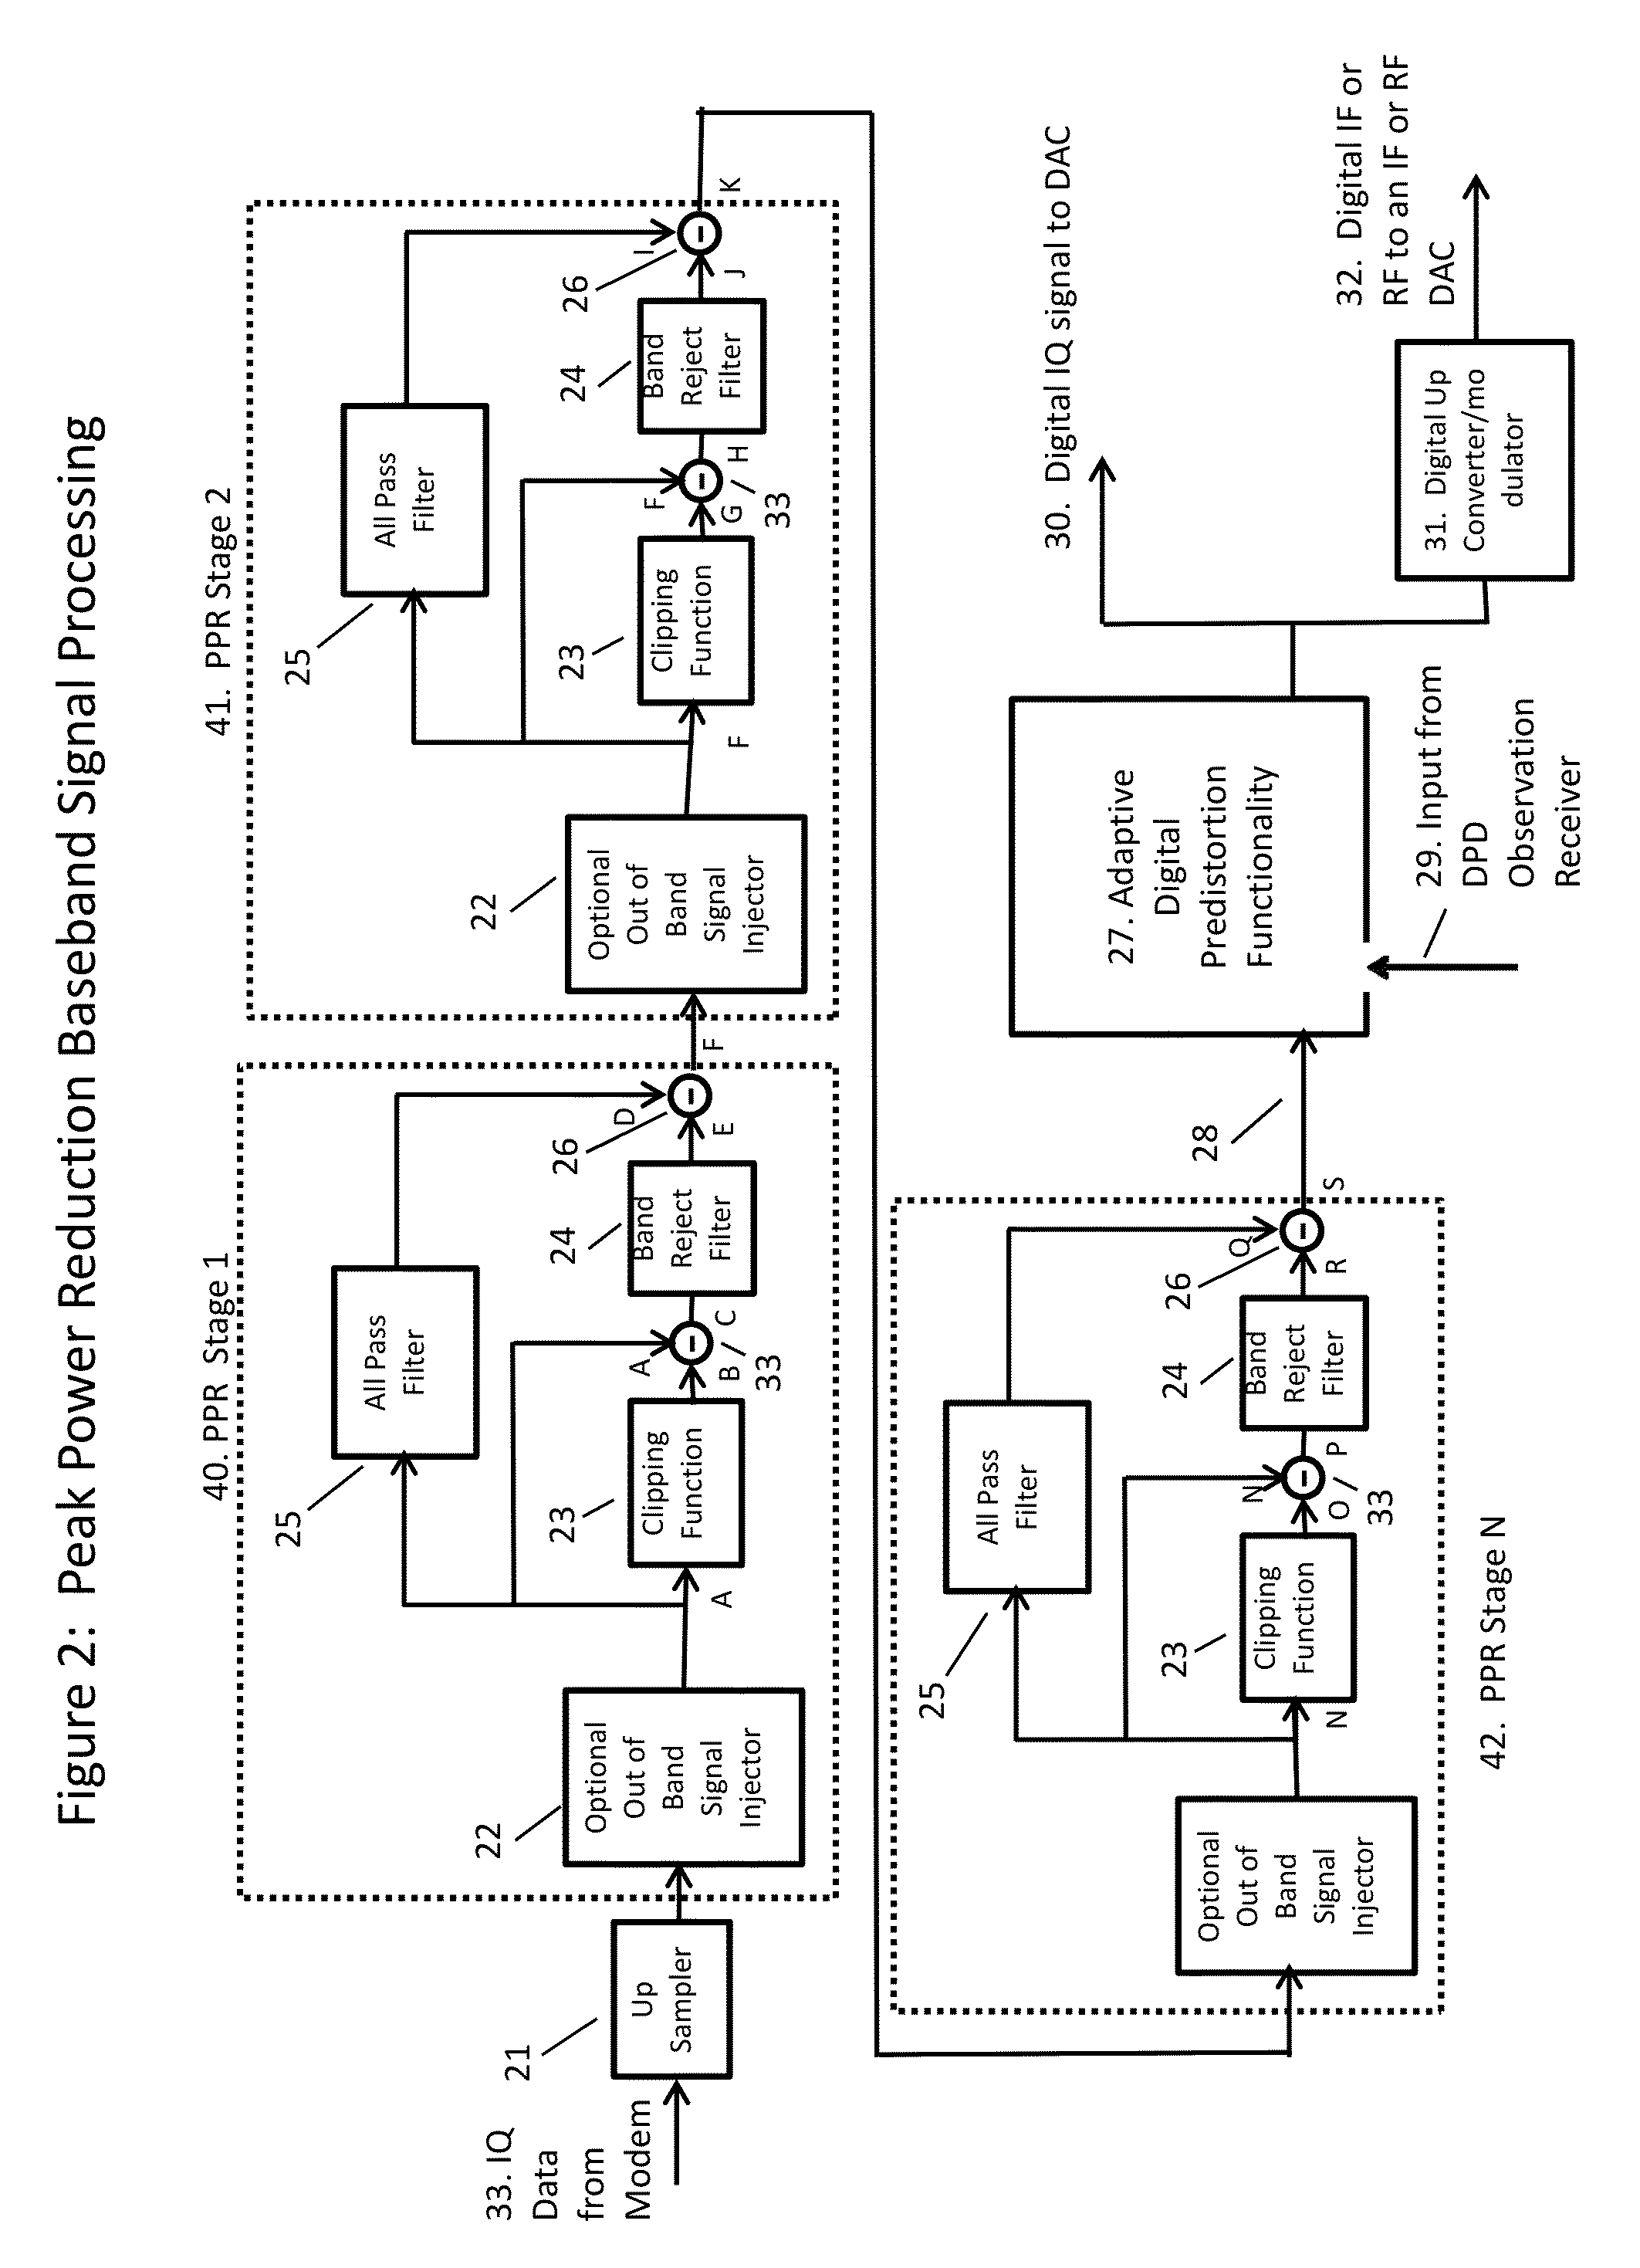 Apparatus, system and method for performing peak power reduction of a communication signal